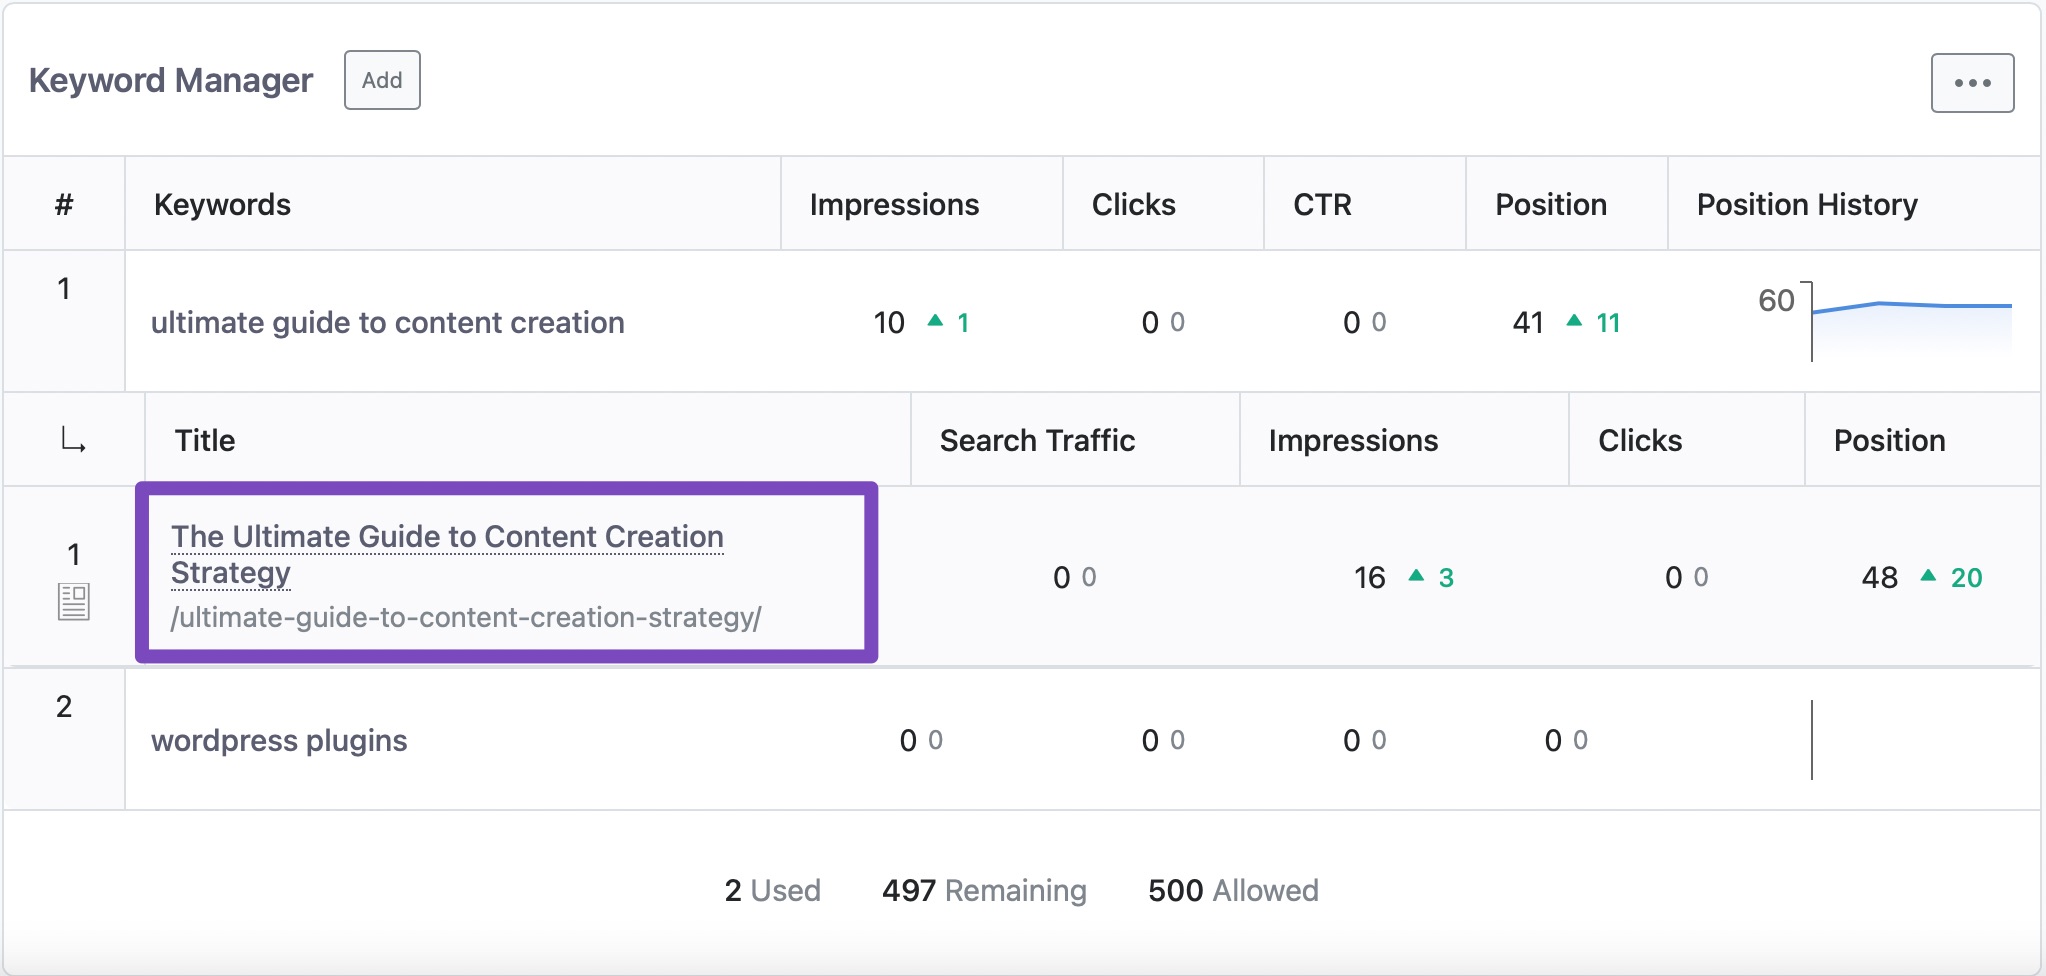 Posts Ranking for a keyword